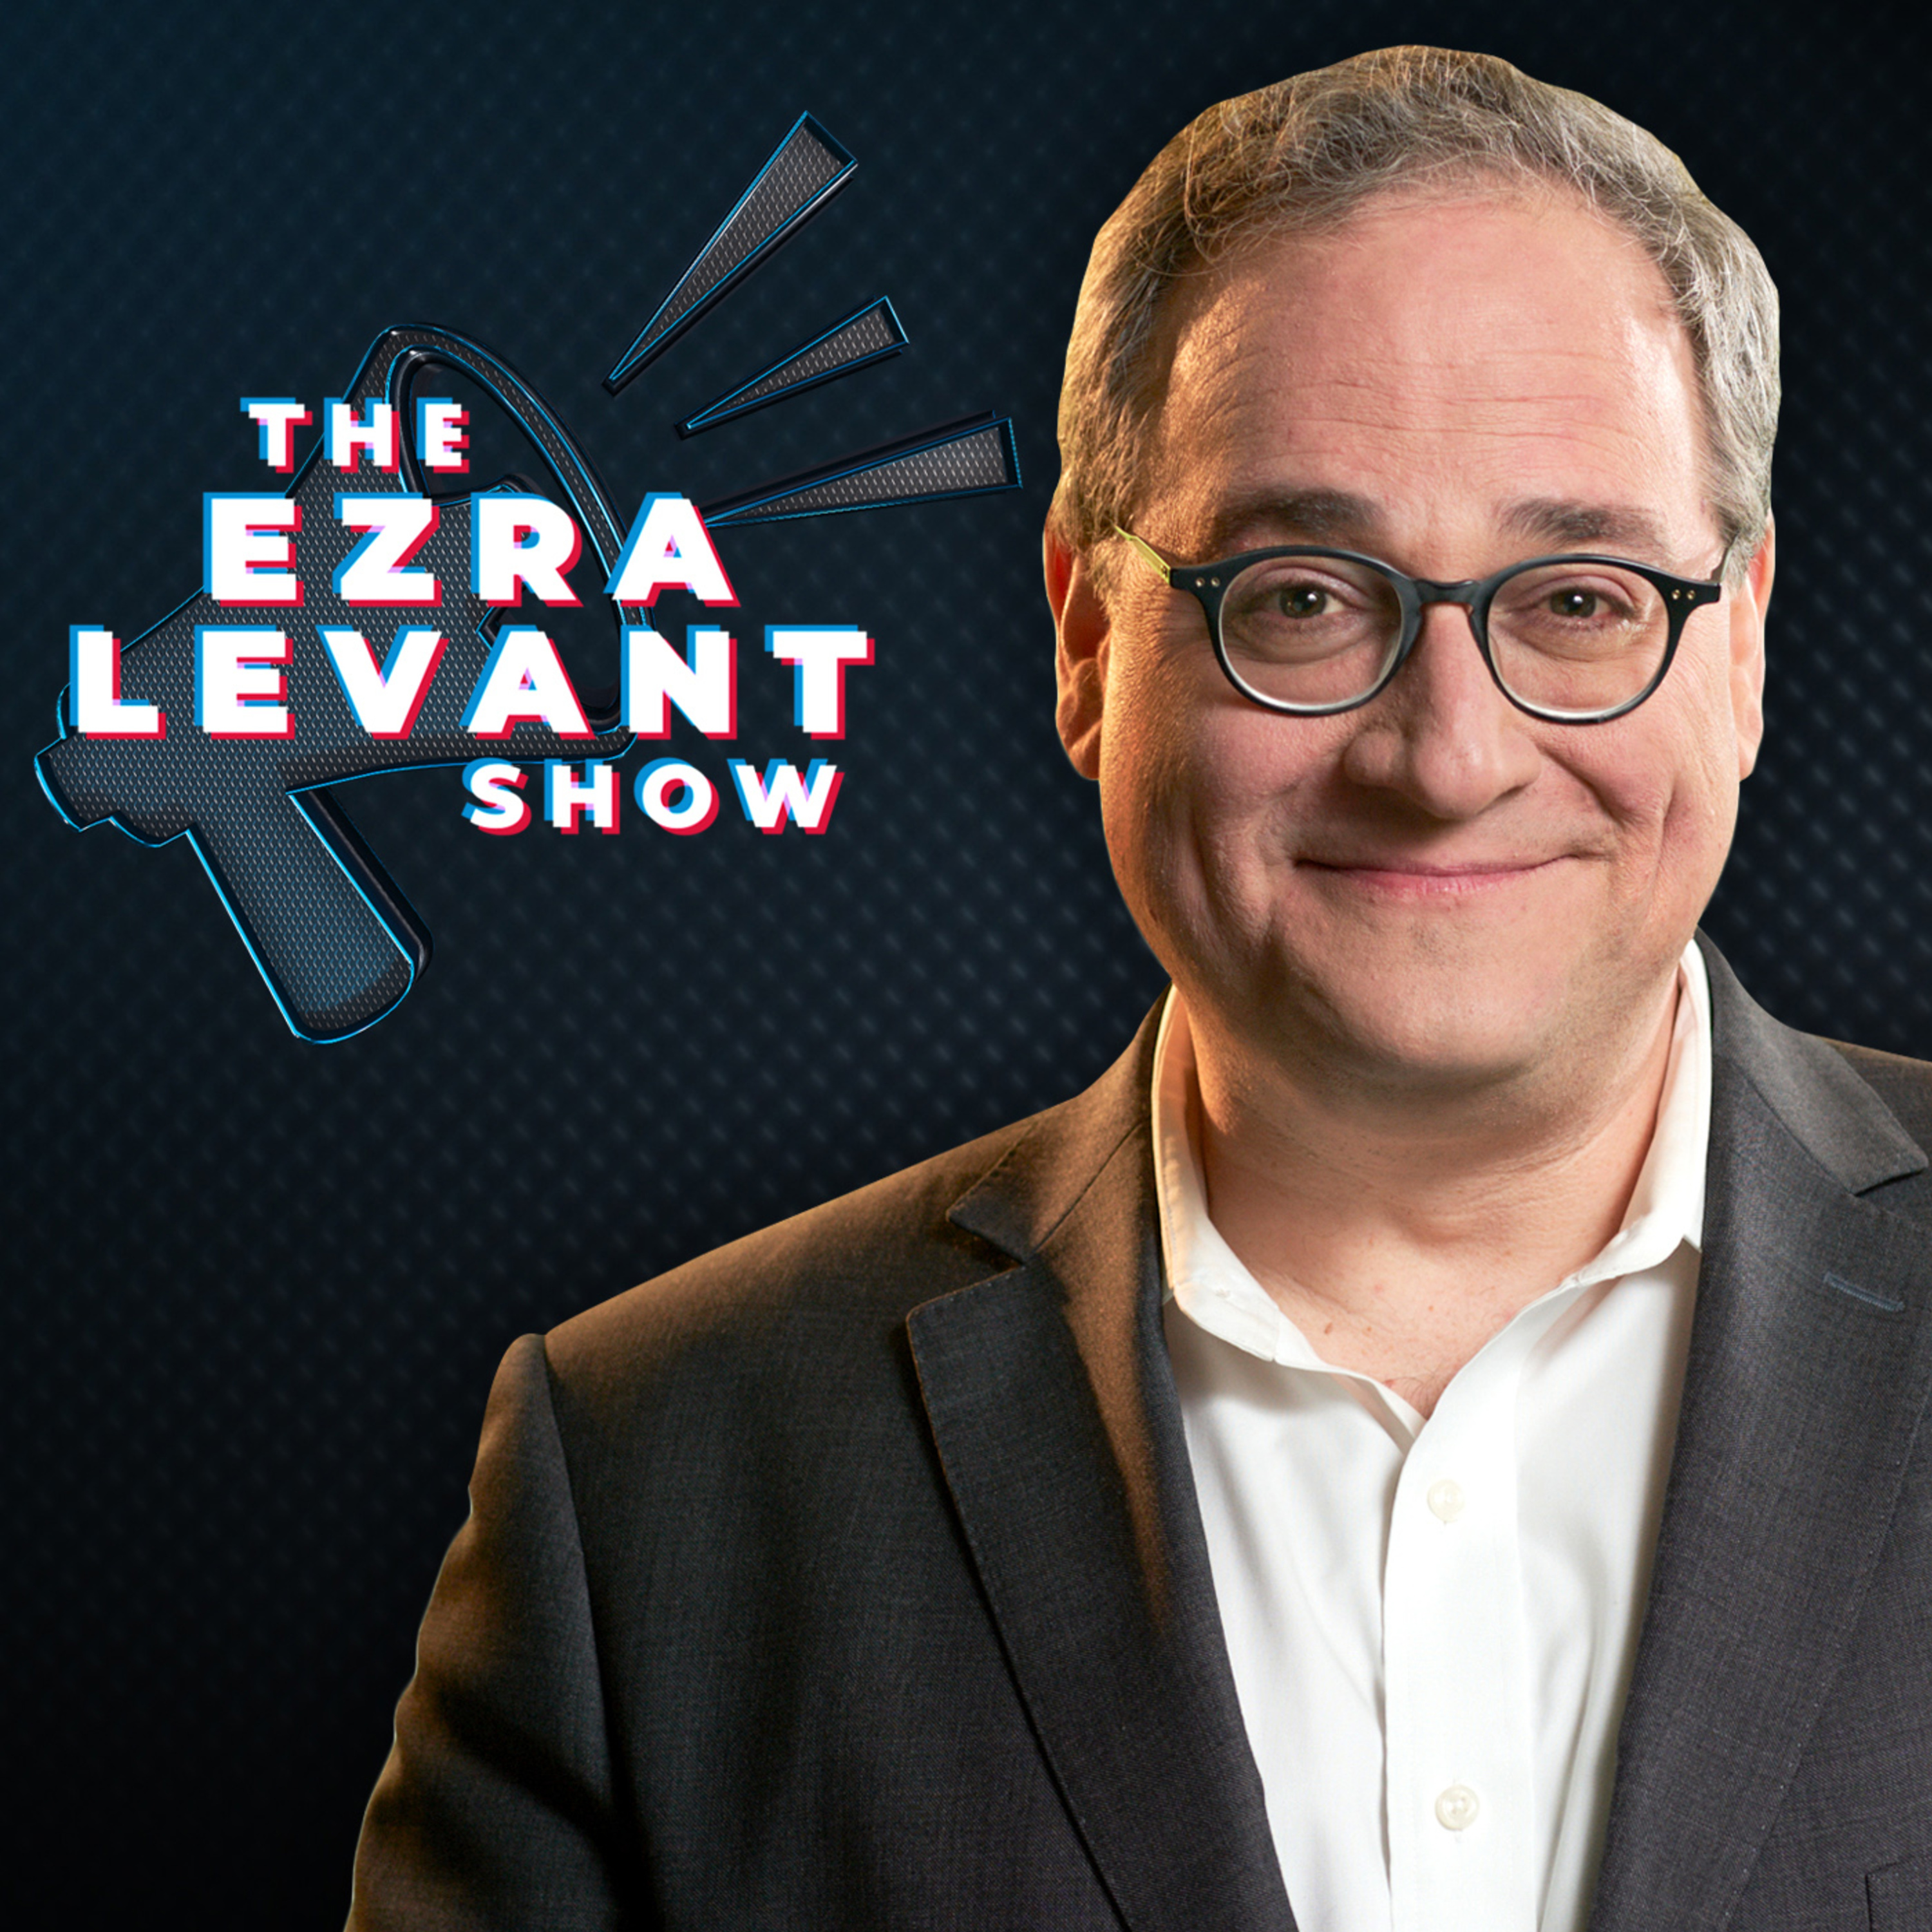 EZRA LEVANT: CBC’s ombudsman criticizes their journalists for smearing conservatives as 'far-right conspiracy theorists'